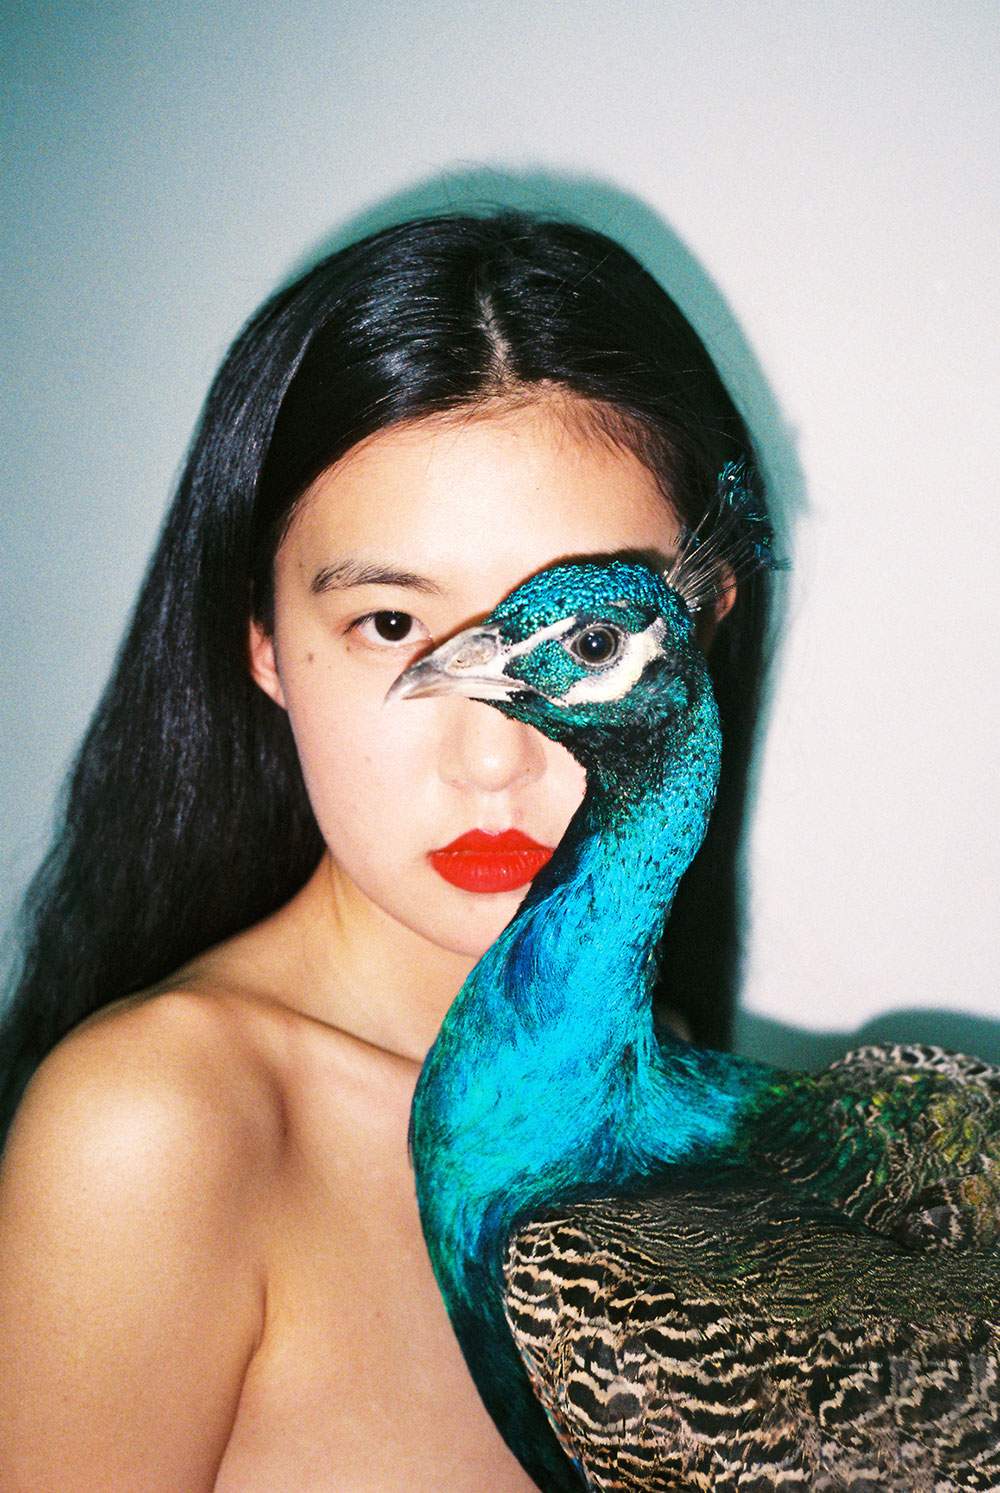 Ren Hang's Nudes on display for the first time in Italy. At the Pecci Center in Prato